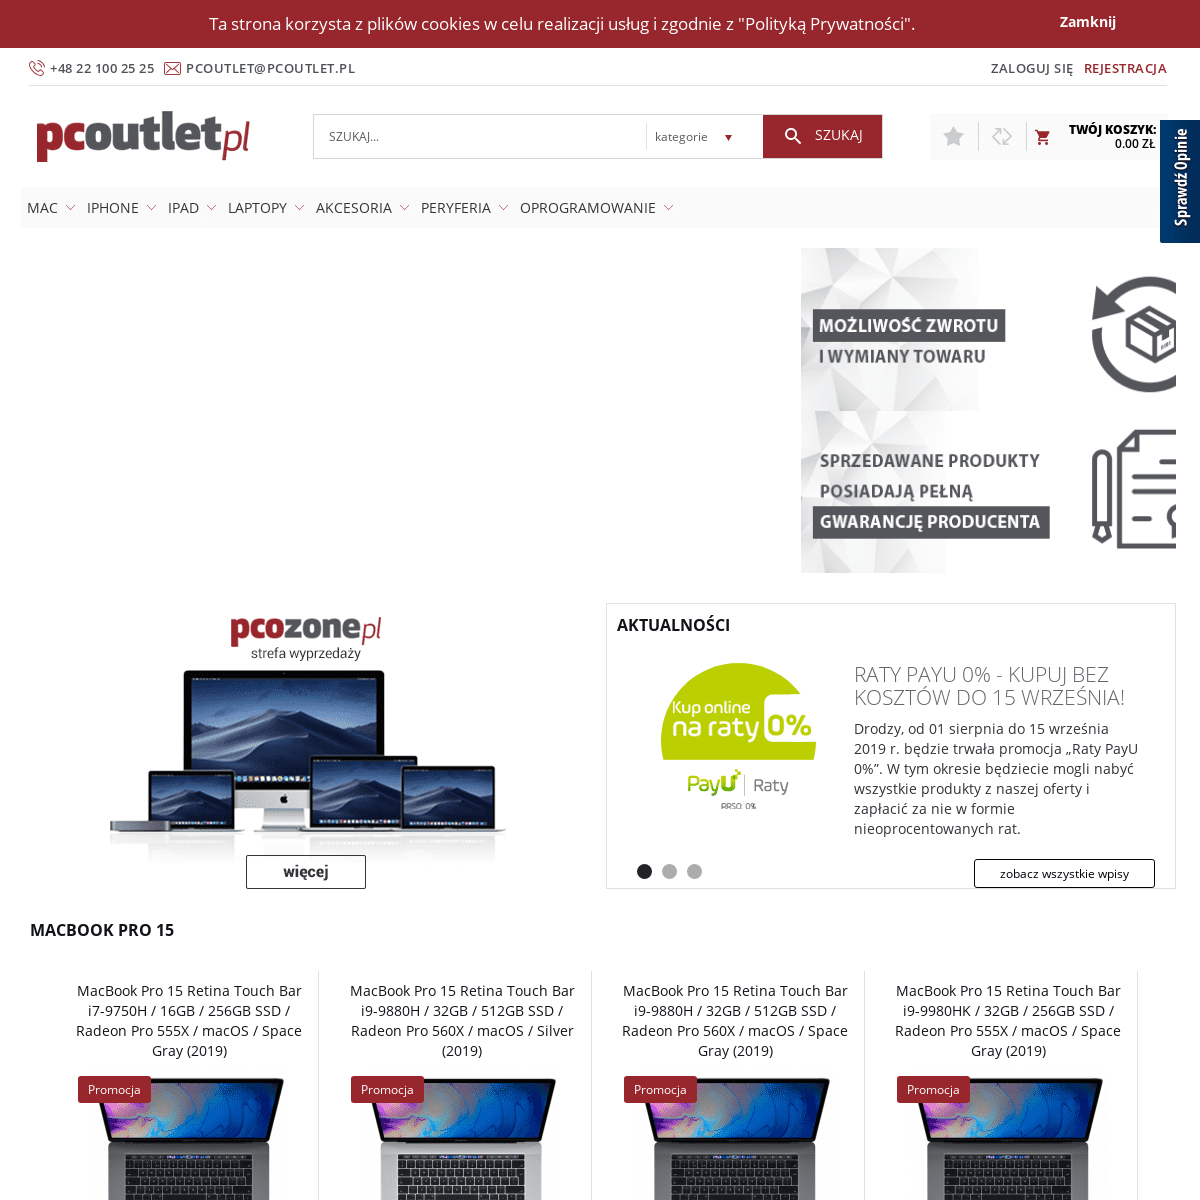 A complete backup of pcoutlet.pl